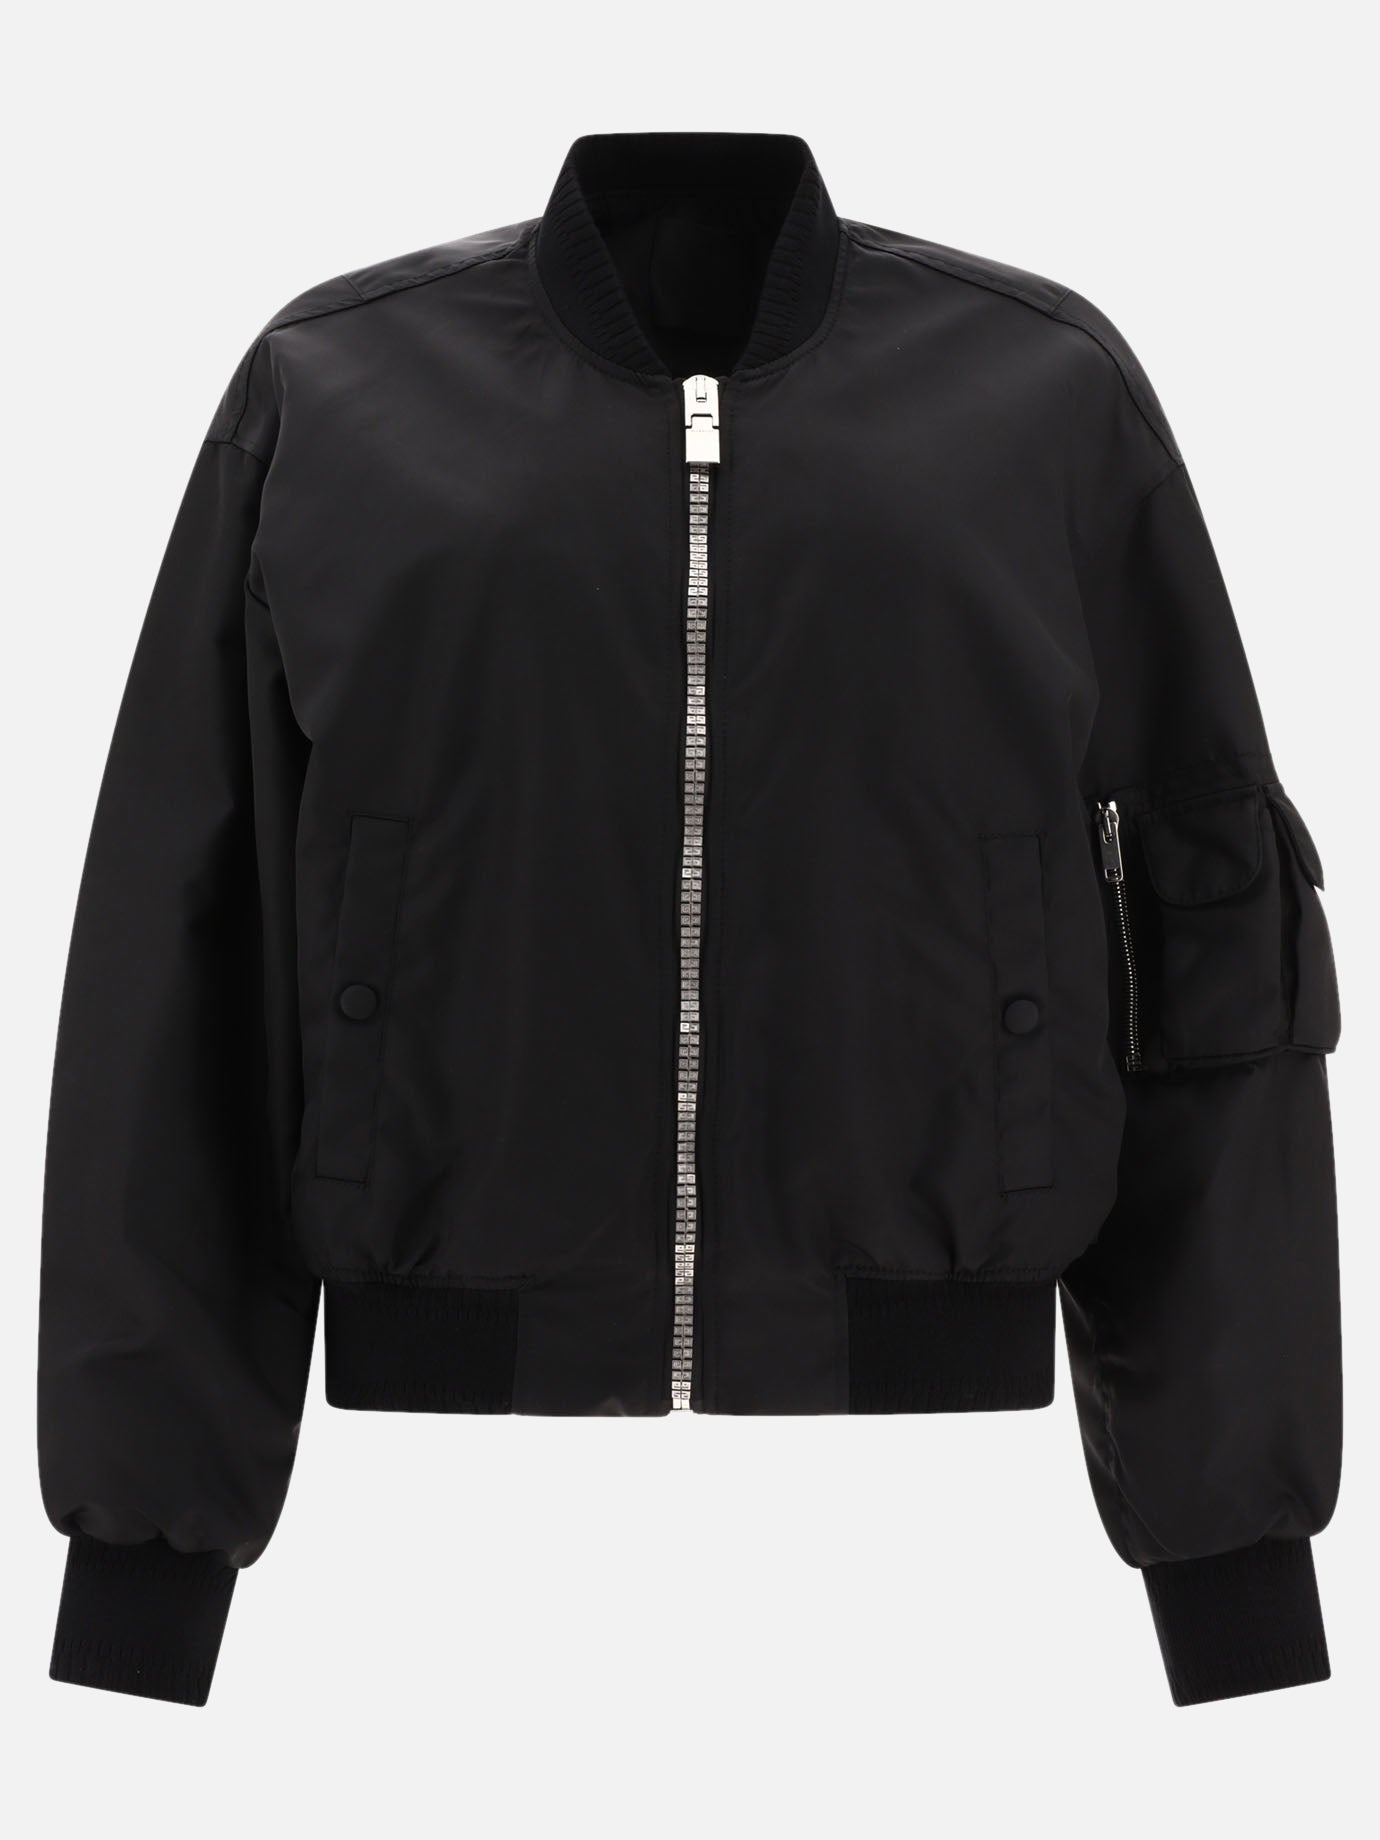 GIVENCHY bomber jacket with pocket detail